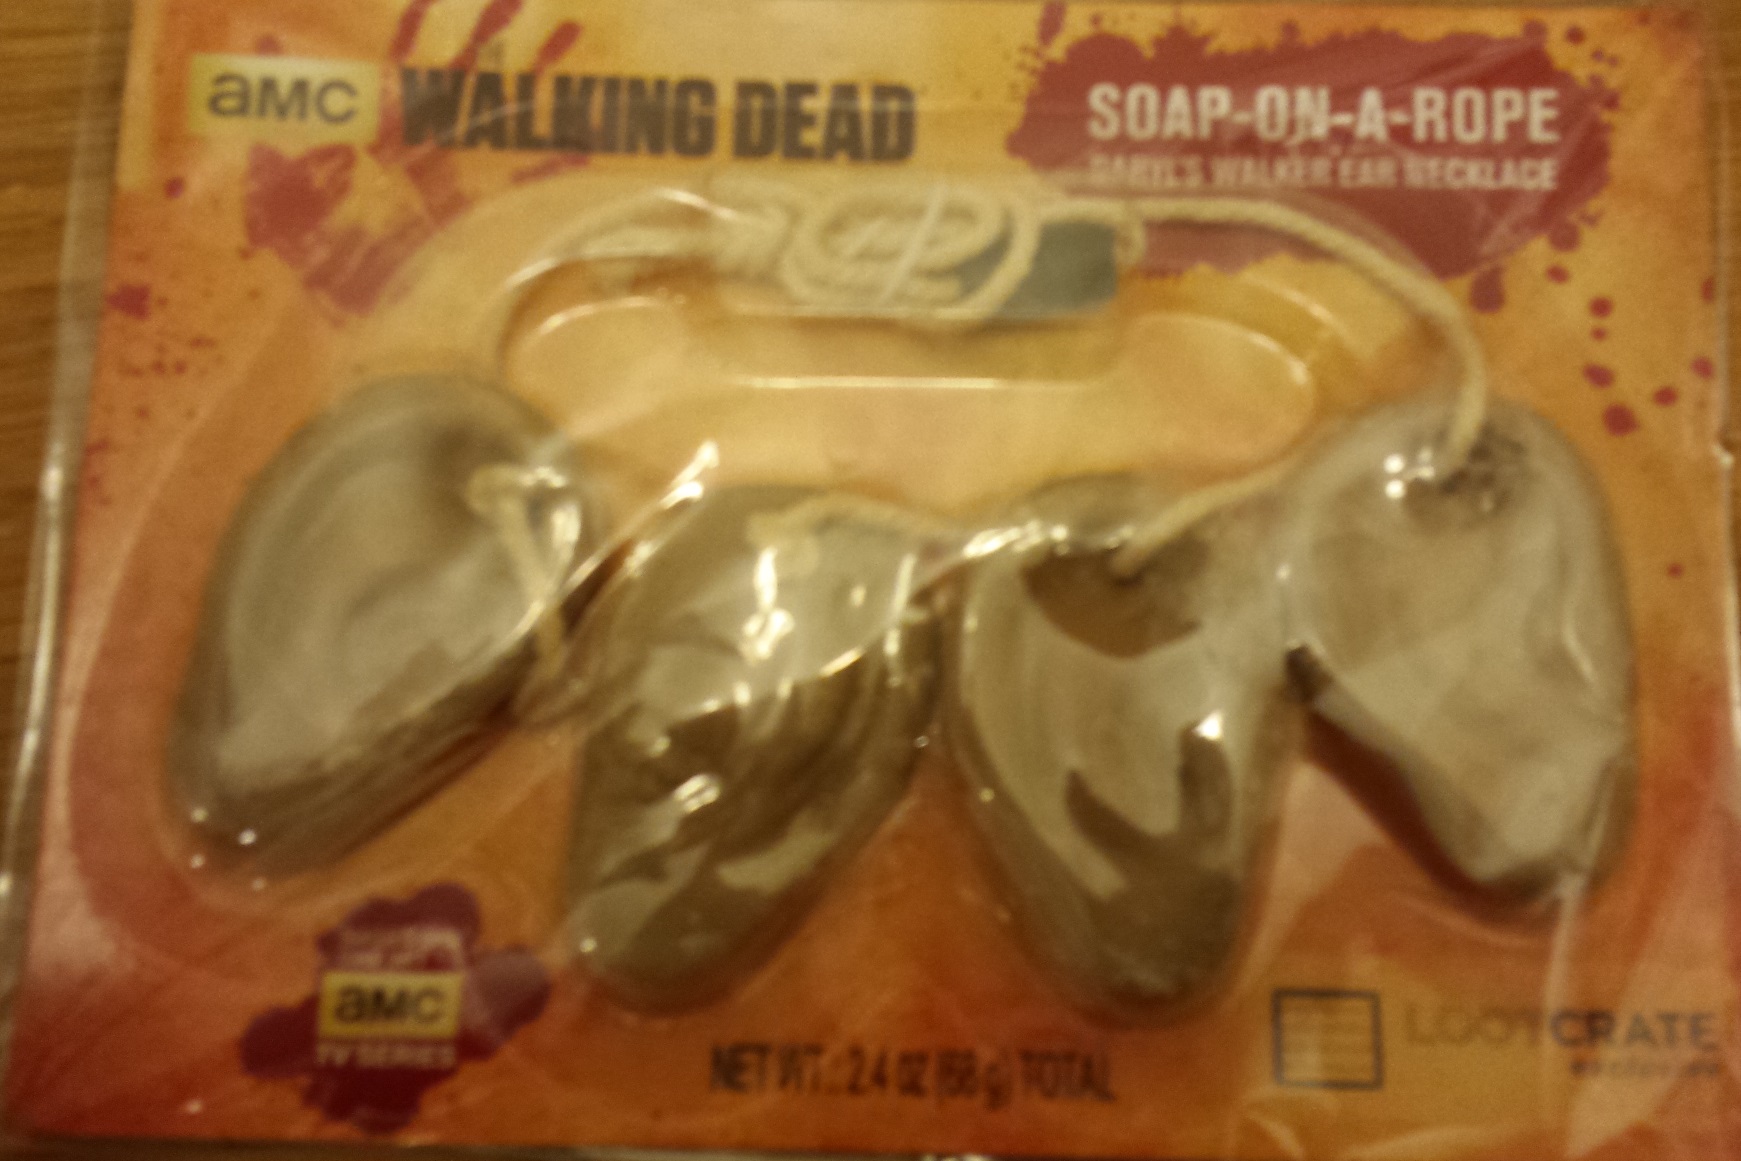 Walking dead ears, theme dead, deadpool, february's loot crate, loot crate review, loot crate unboxing, the walking dead